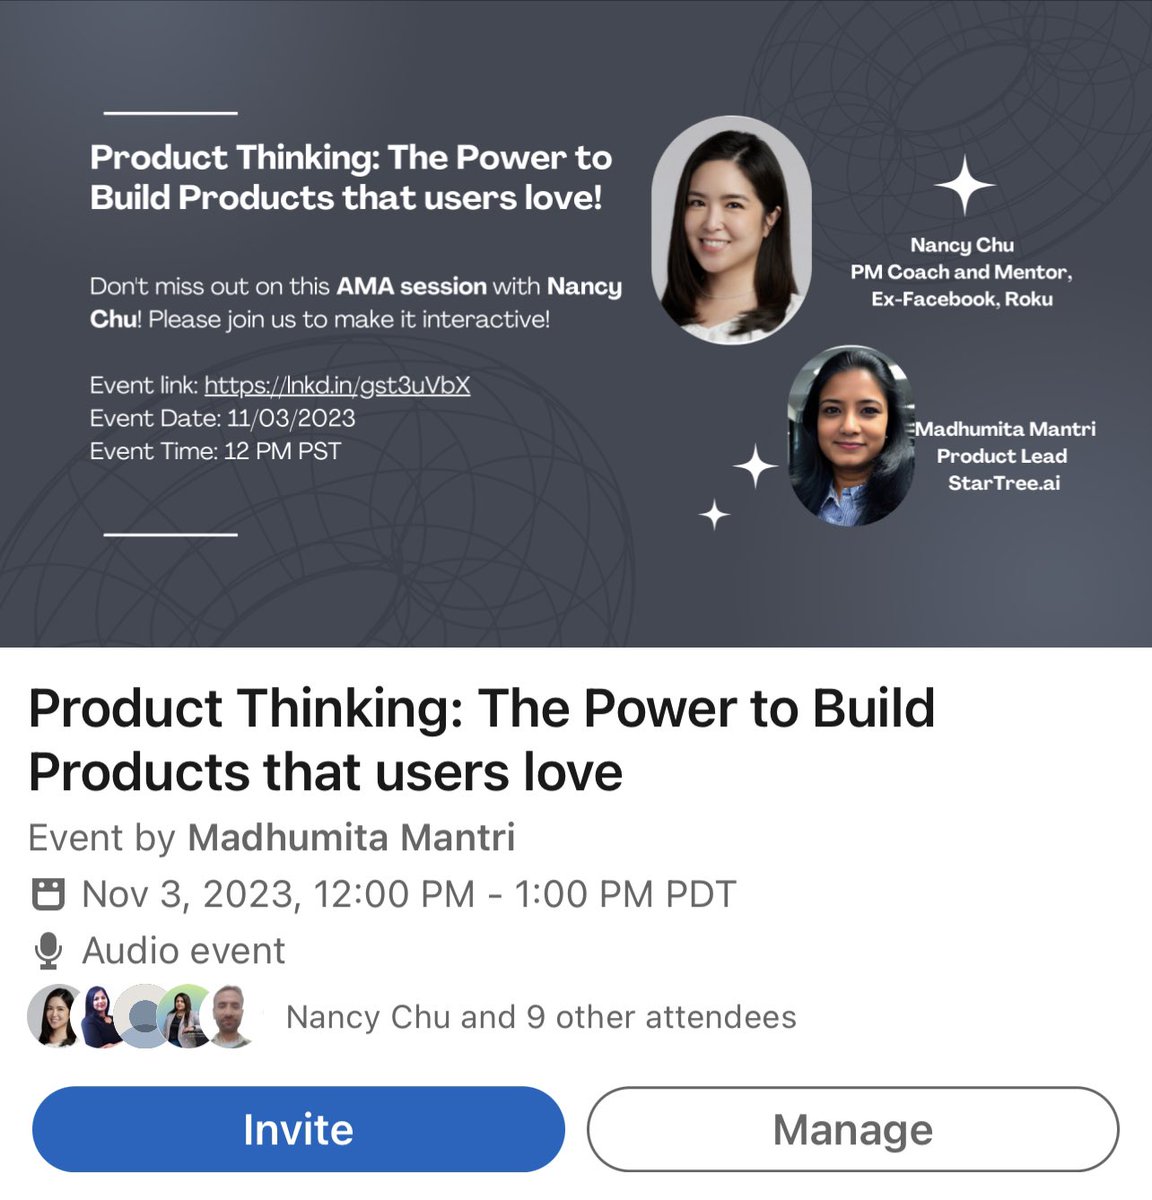 I am hosting an AMA session with  Nancy Chu, PM Coach and Mentor, Ex-Facebook, Roku on 11/03 at 12:00 PM PST on the topic Product Thinking: The Power to Build Products that Users love.

The link to the event can be found in the comments section

#ProductThinking #AMA #innovation